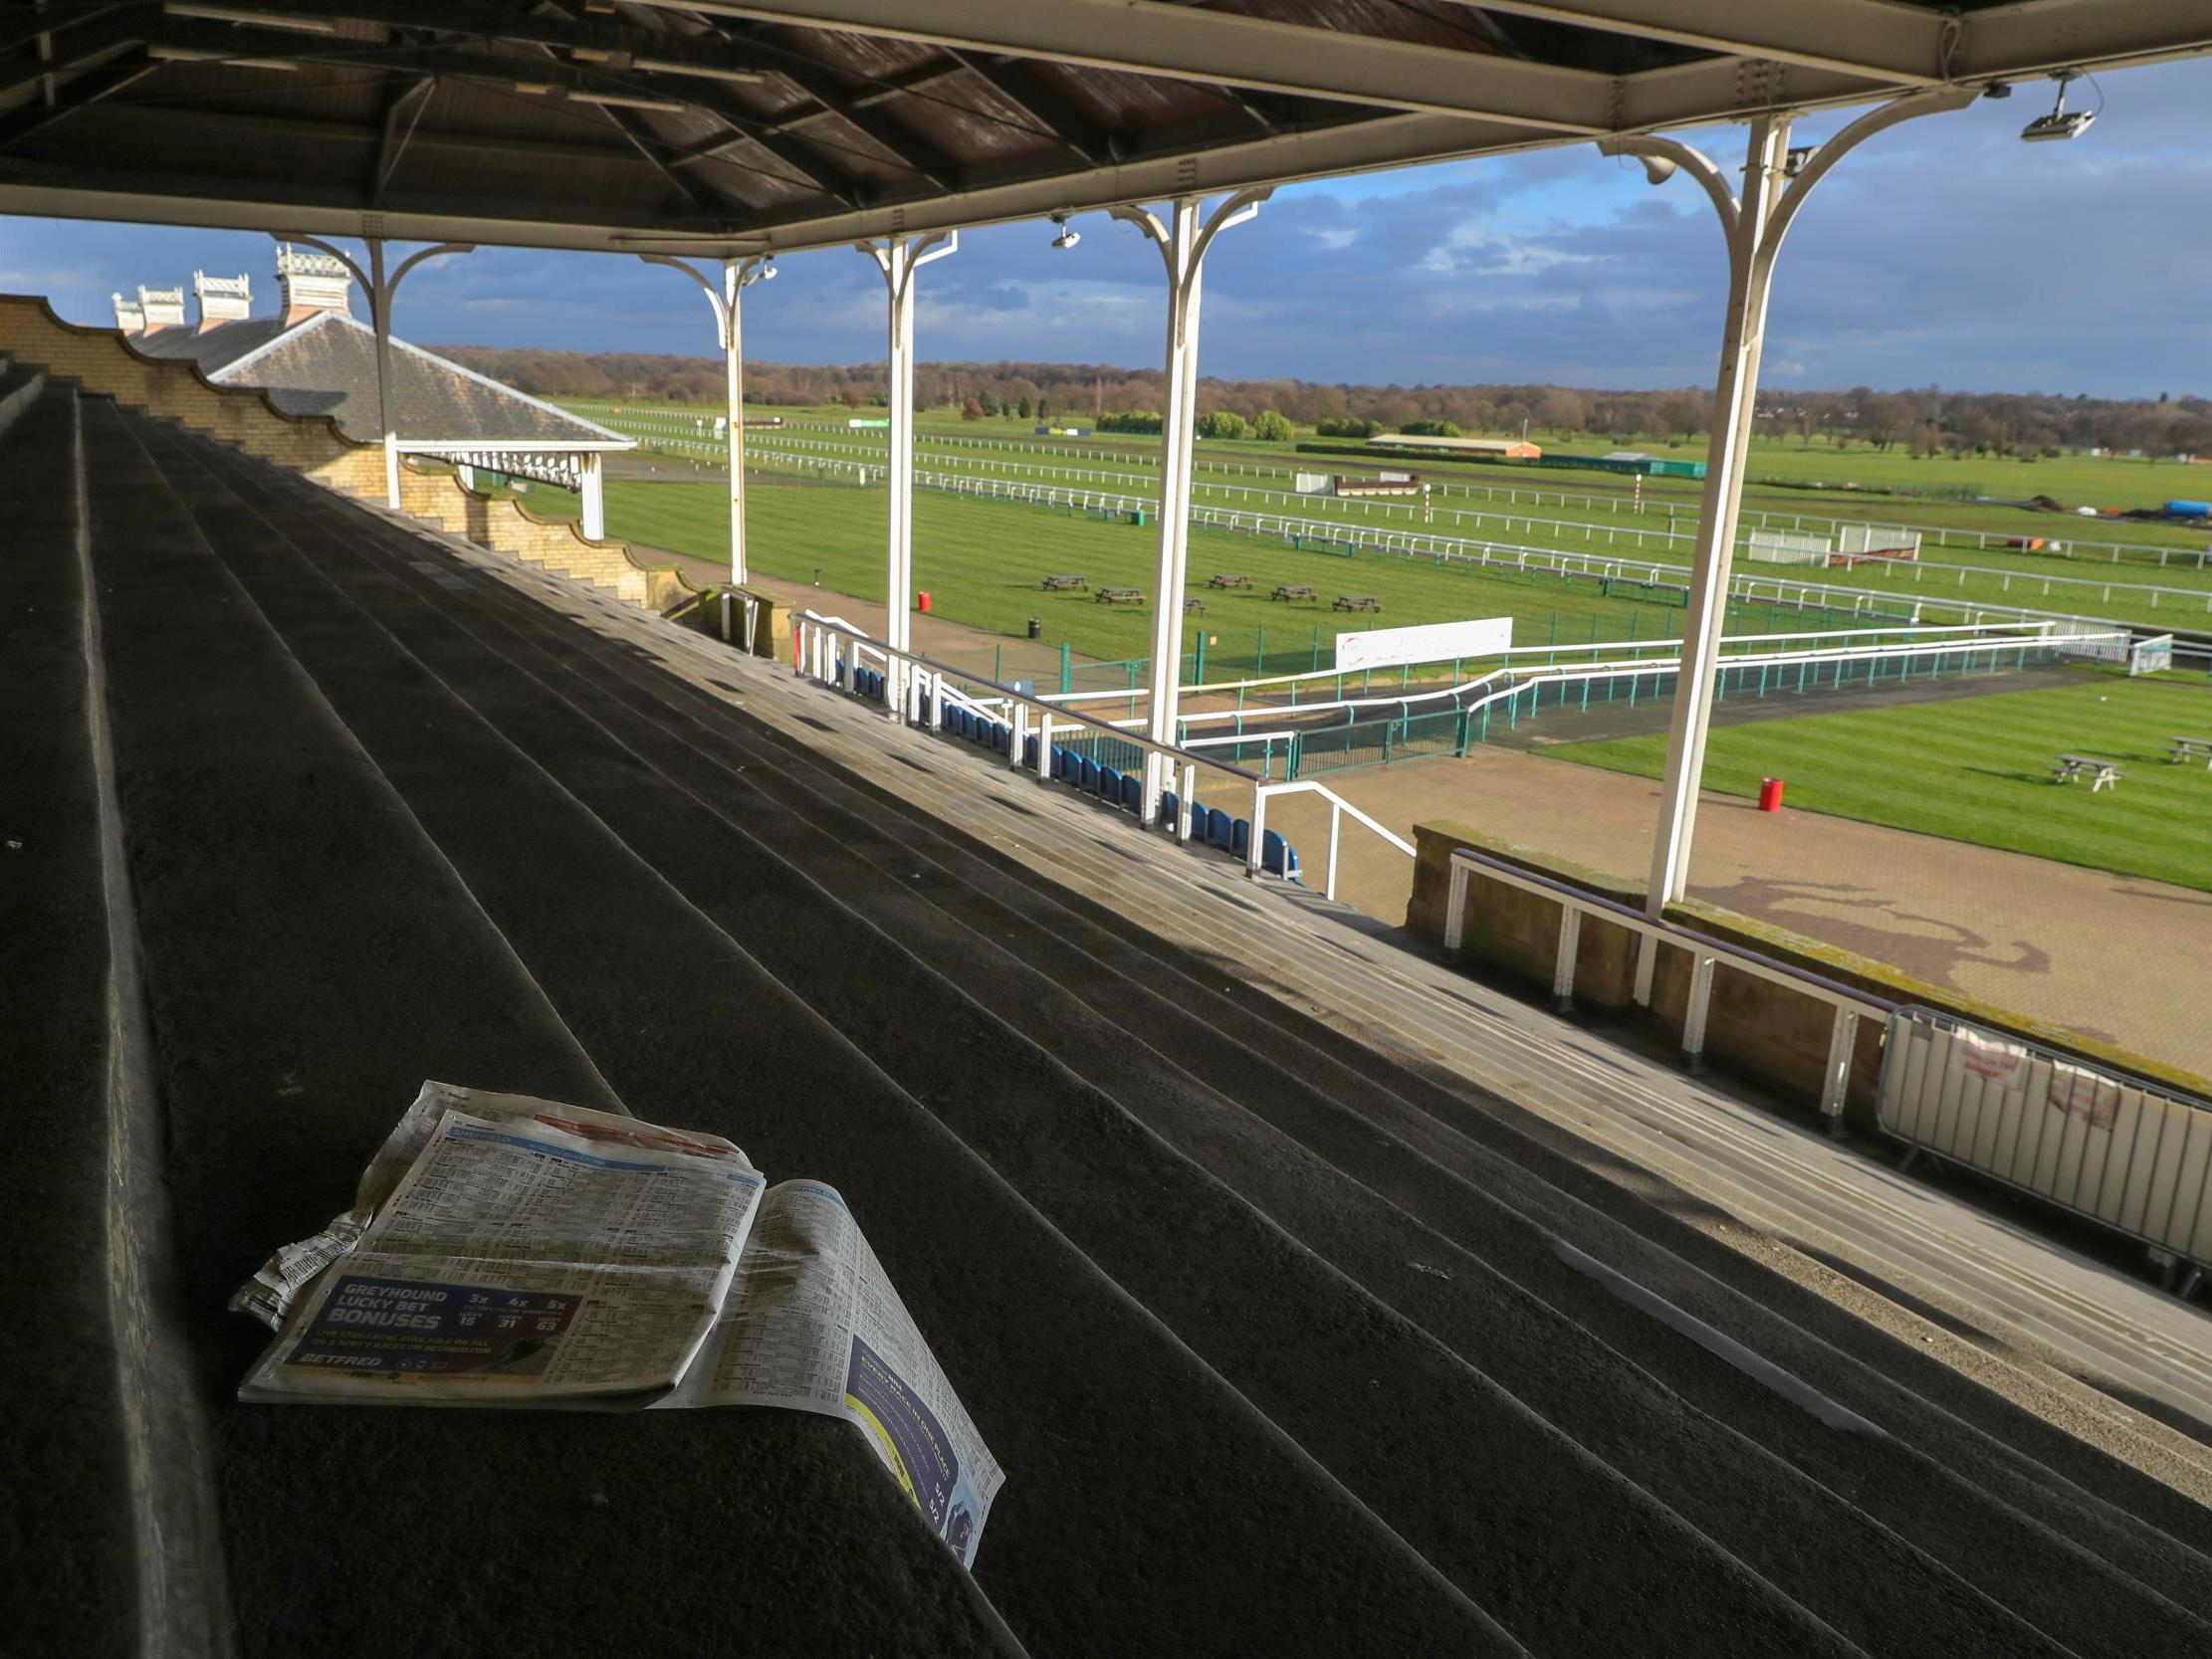 Terraces and stands remain empty after today's racing at Doncaster Racecourse was cancelled due to the equine flu outbreak